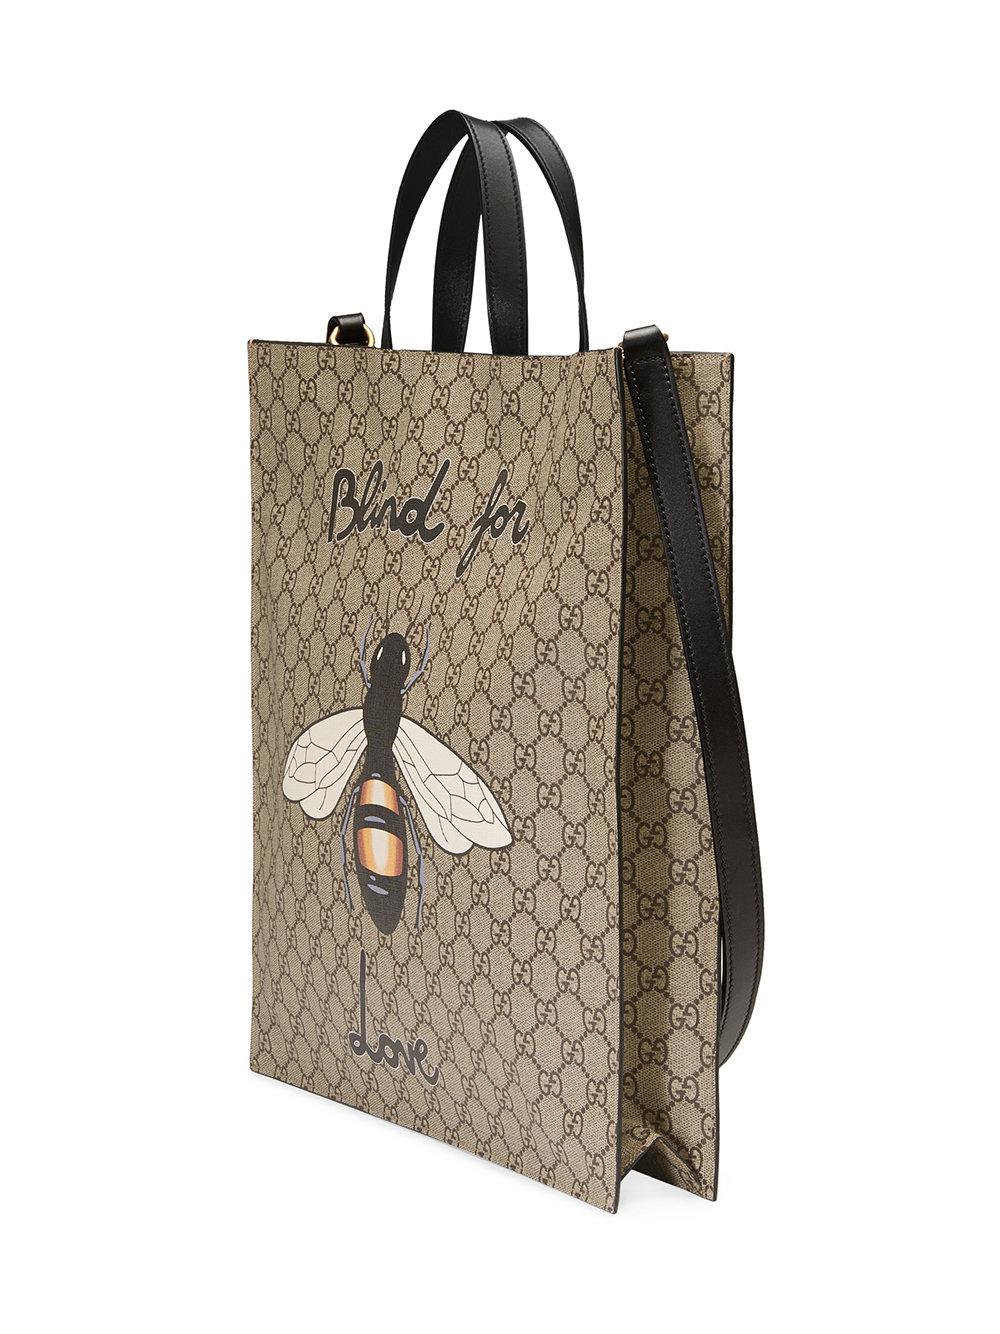 Gucci Canvas Bee Print Soft Gg Supreme Tote in Natural - Lyst